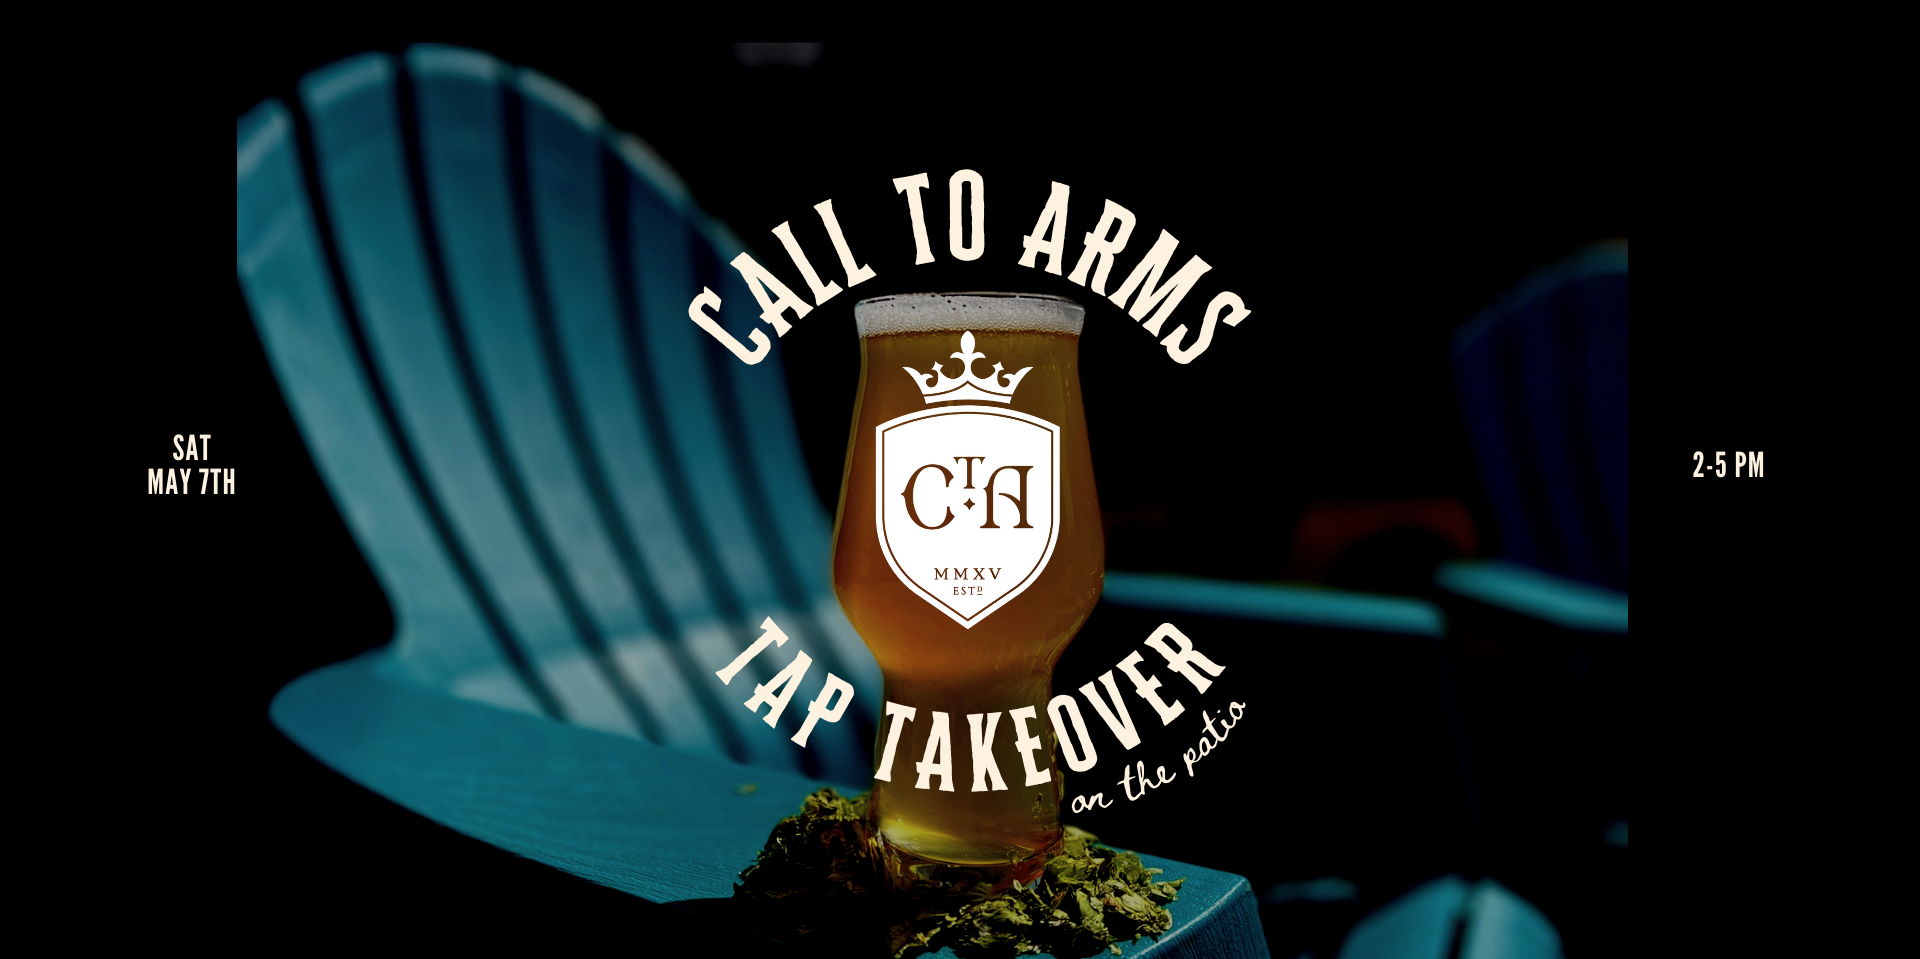 Call To Arms Tap Takeover promotional image